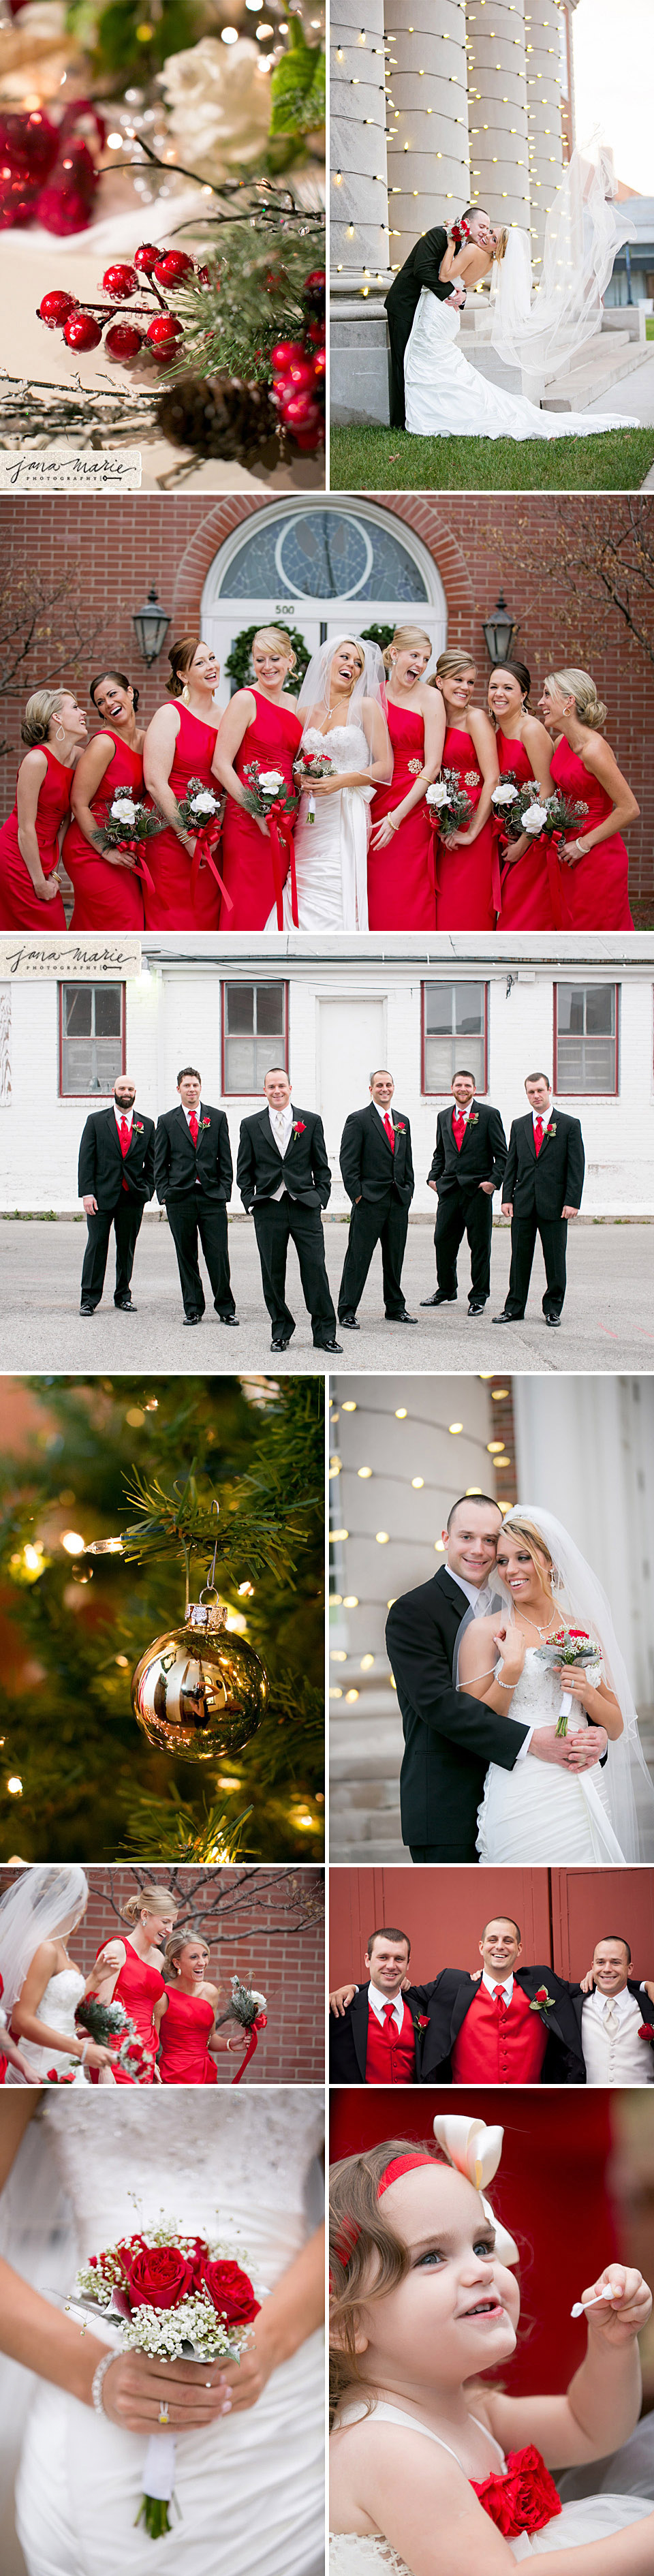 Bridal party, bride and groom, Ornaments, Christmas trees, winter receptions, Jana Marie photos